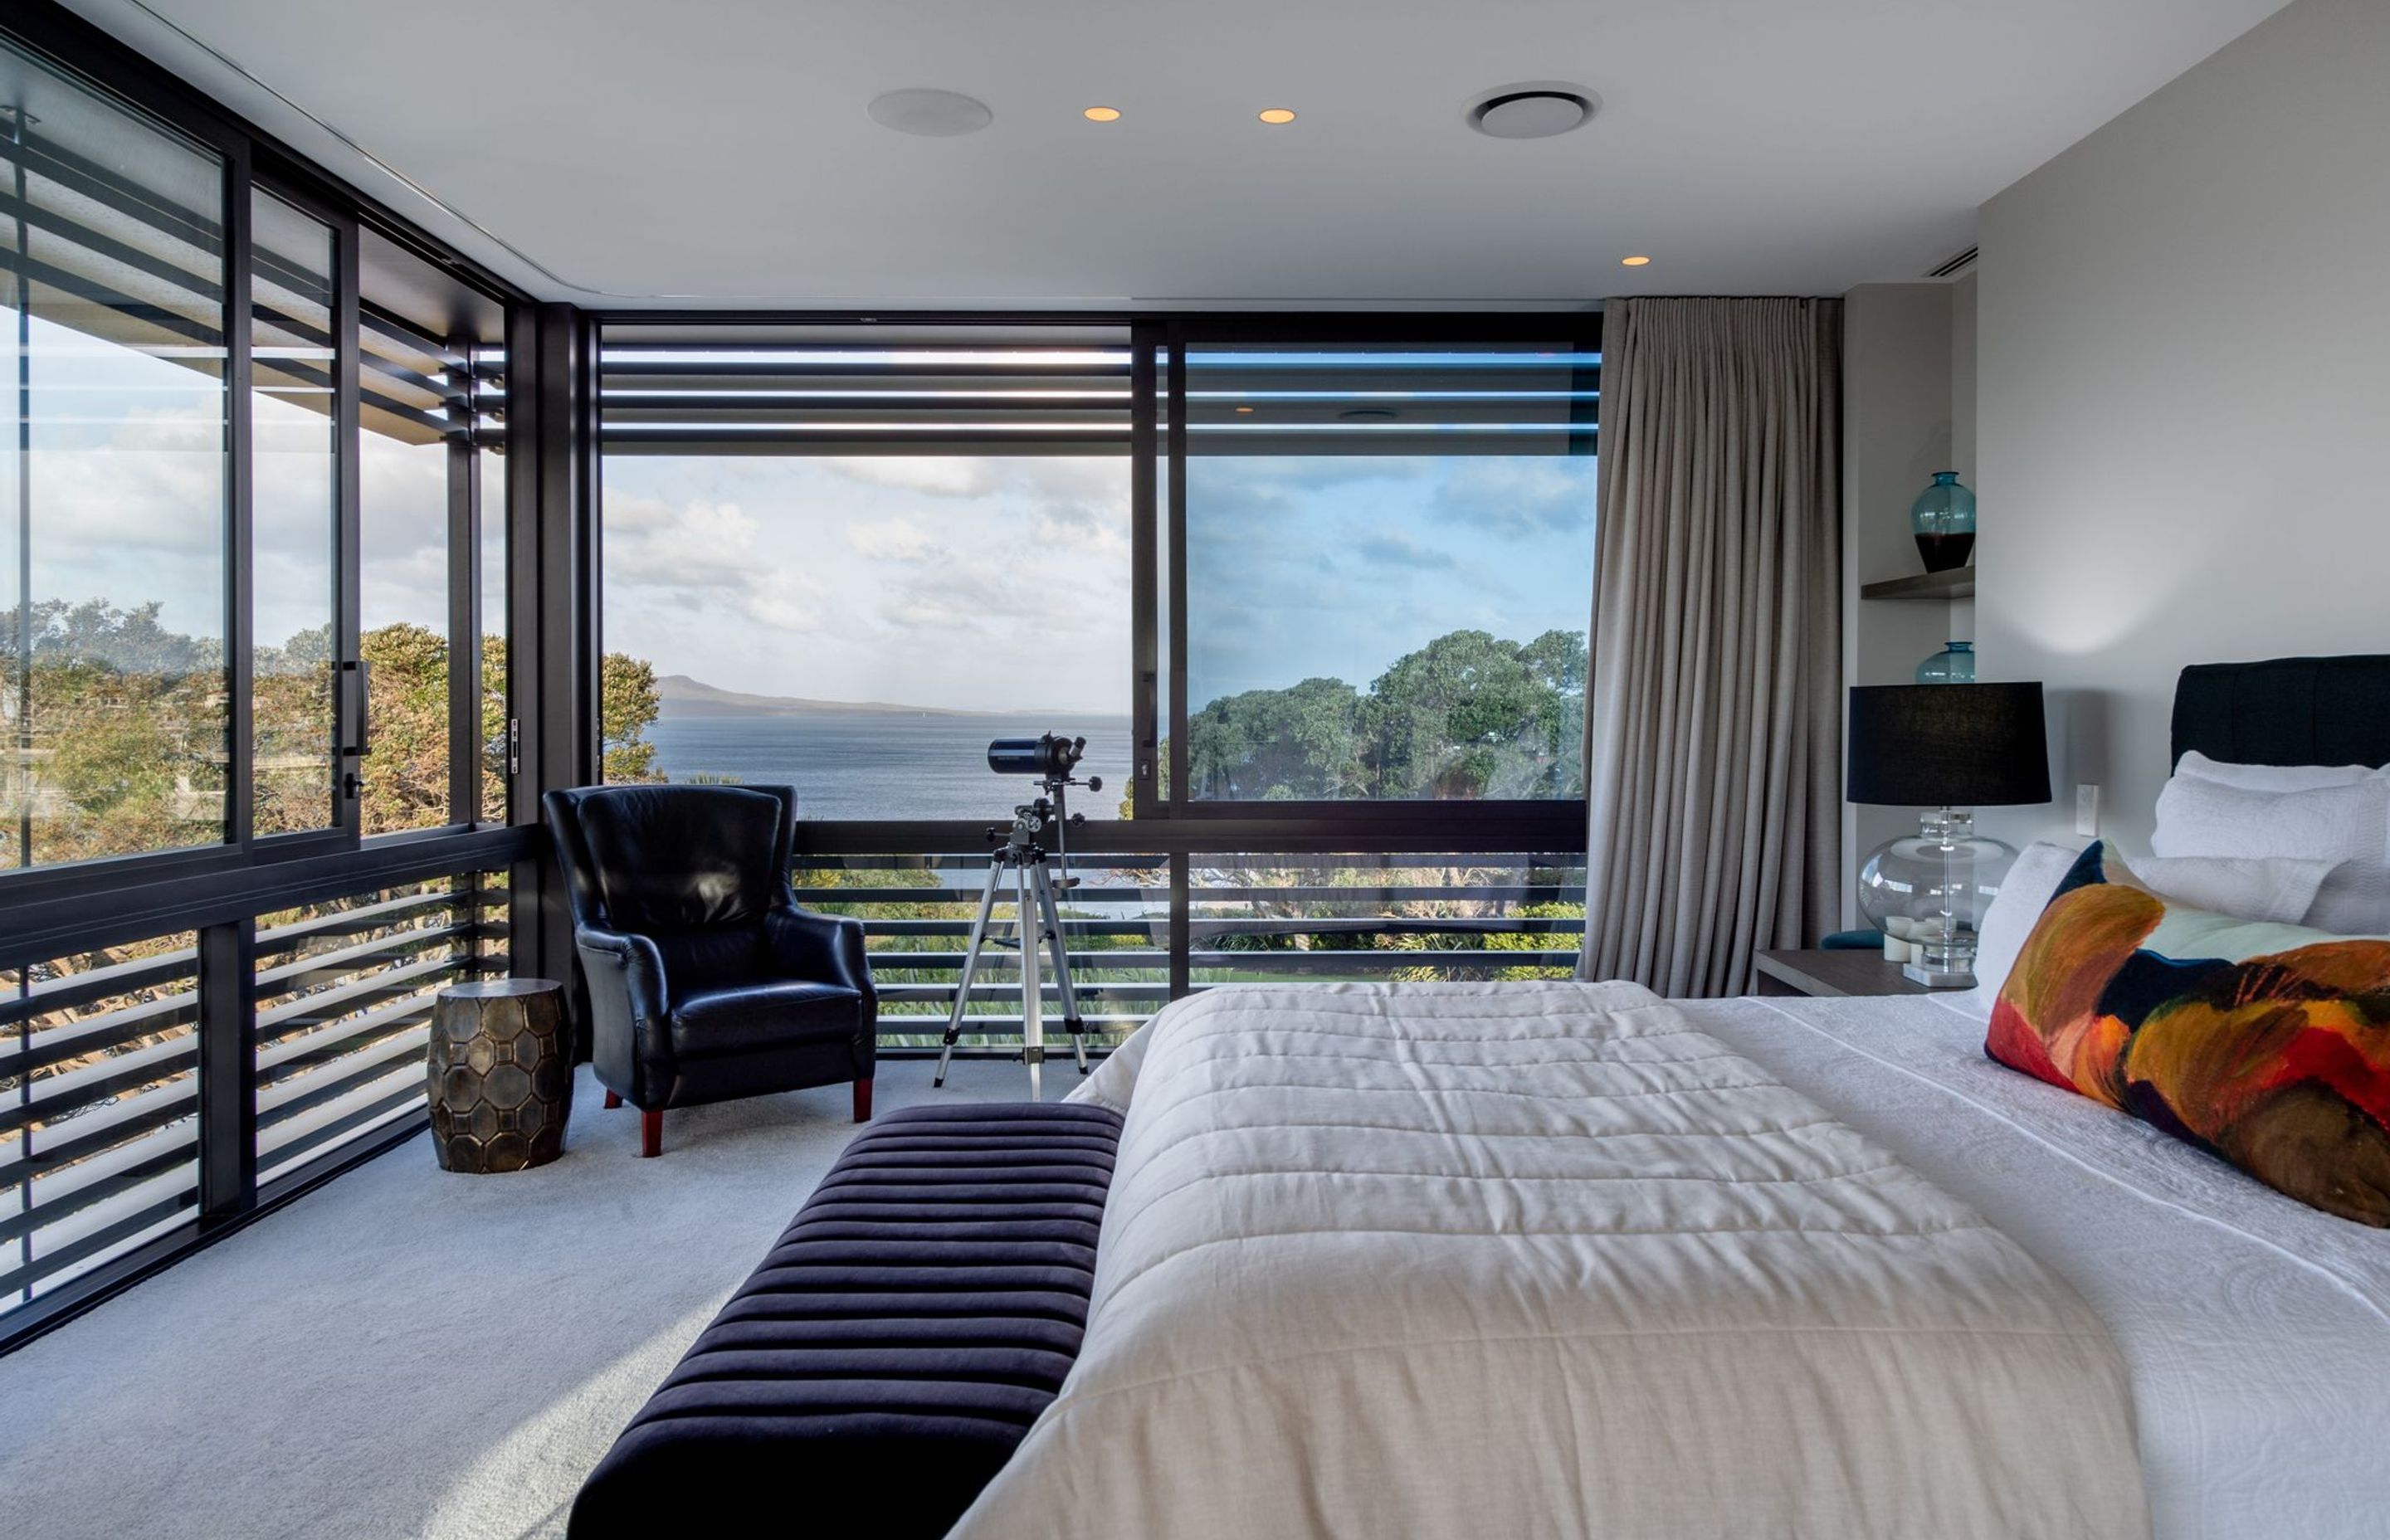 Situated in its 'conservatory-like' glass box, the main bedroom revels in almost 180-degree views of the water.